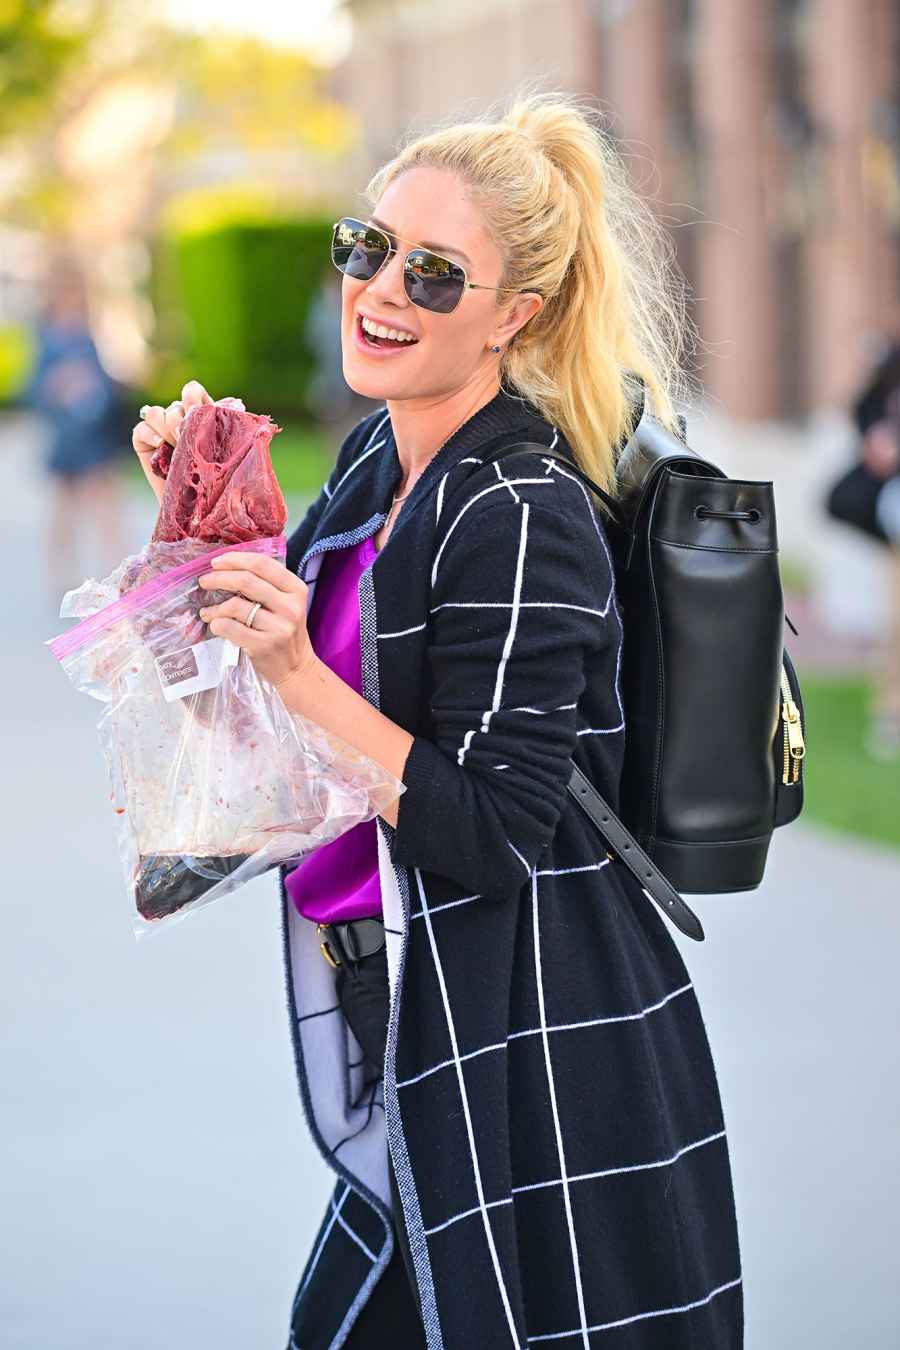 Heidi Montag Eats Raw Meat While Struggling to Conceive 2nd Baby: Video